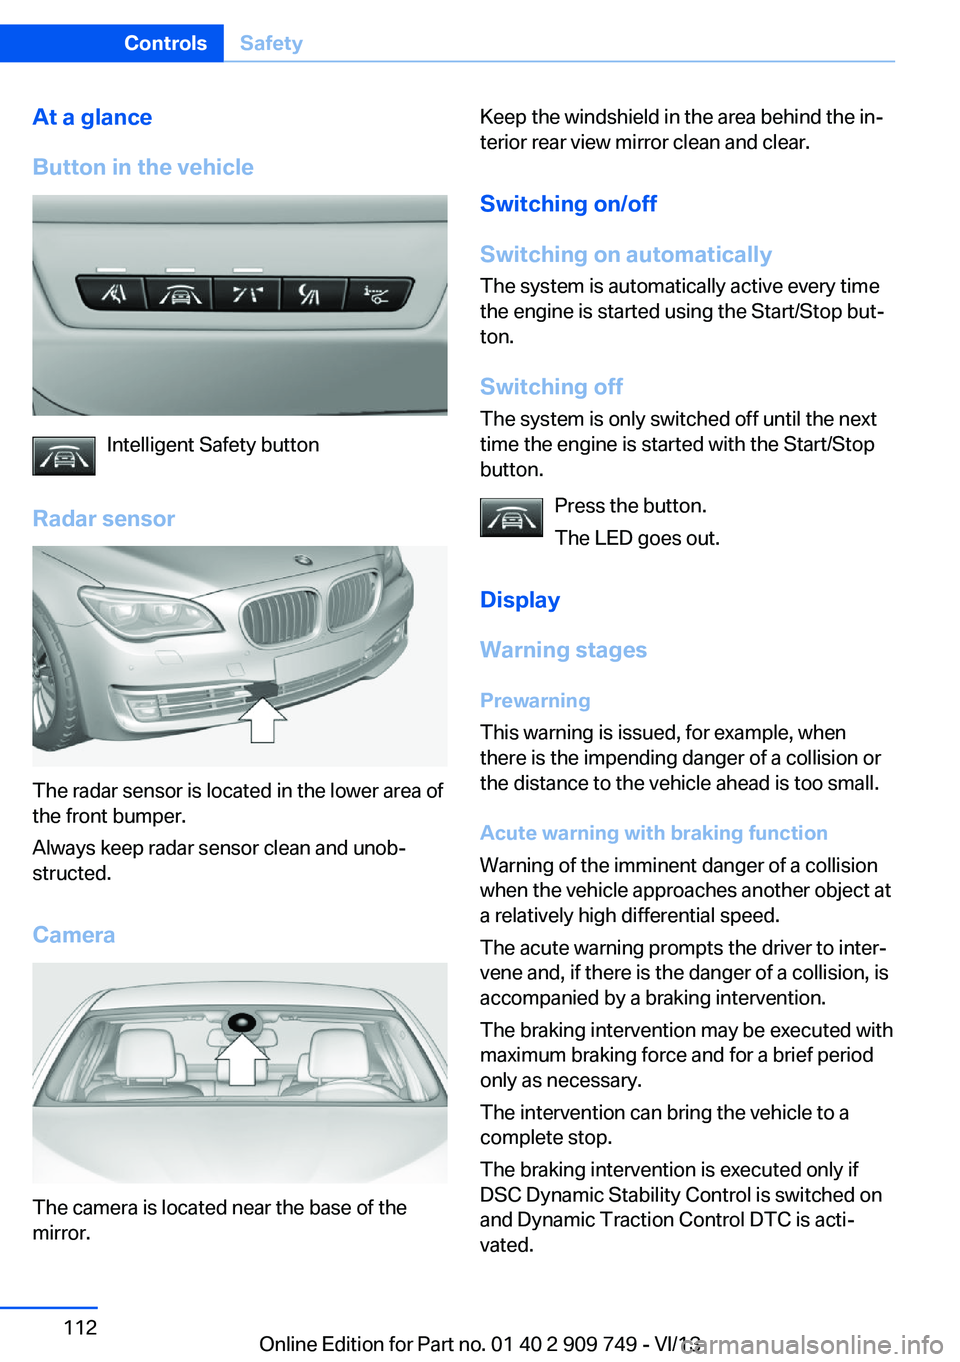 BMW 740LI XDRIVE 2014  Owners Manual At a glance
Button in the vehicle
Intelligent Safety button
Radar sensor
The radar sensor is located in the lower area of
the front bumper.
Always keep radar sensor clean and unob‐
structed.
Camera
